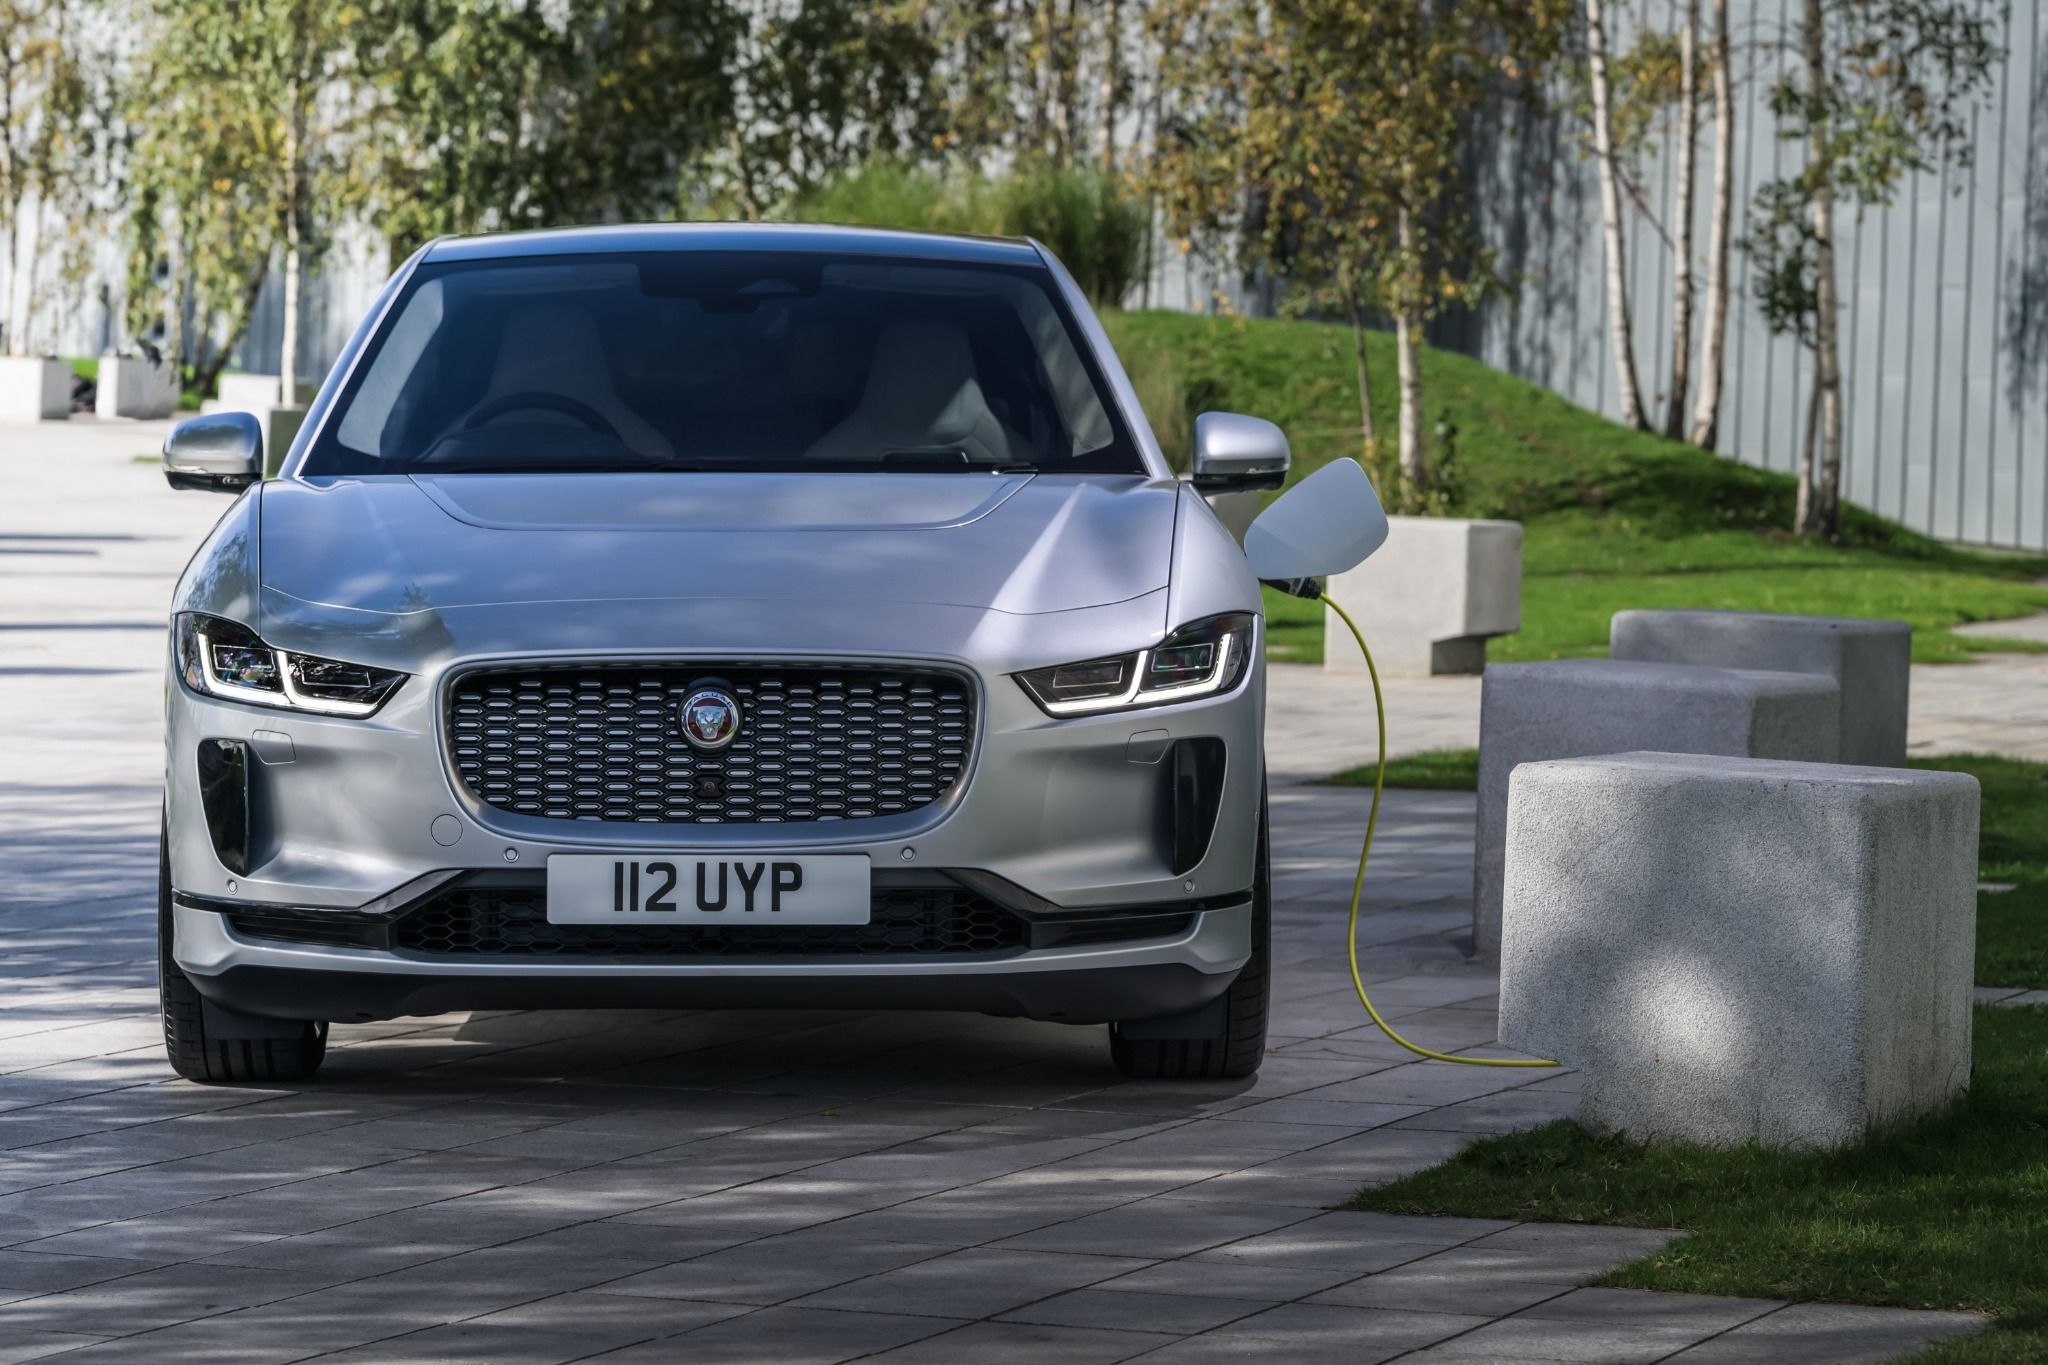 Front view of a silver Jaguar I-Pace charging